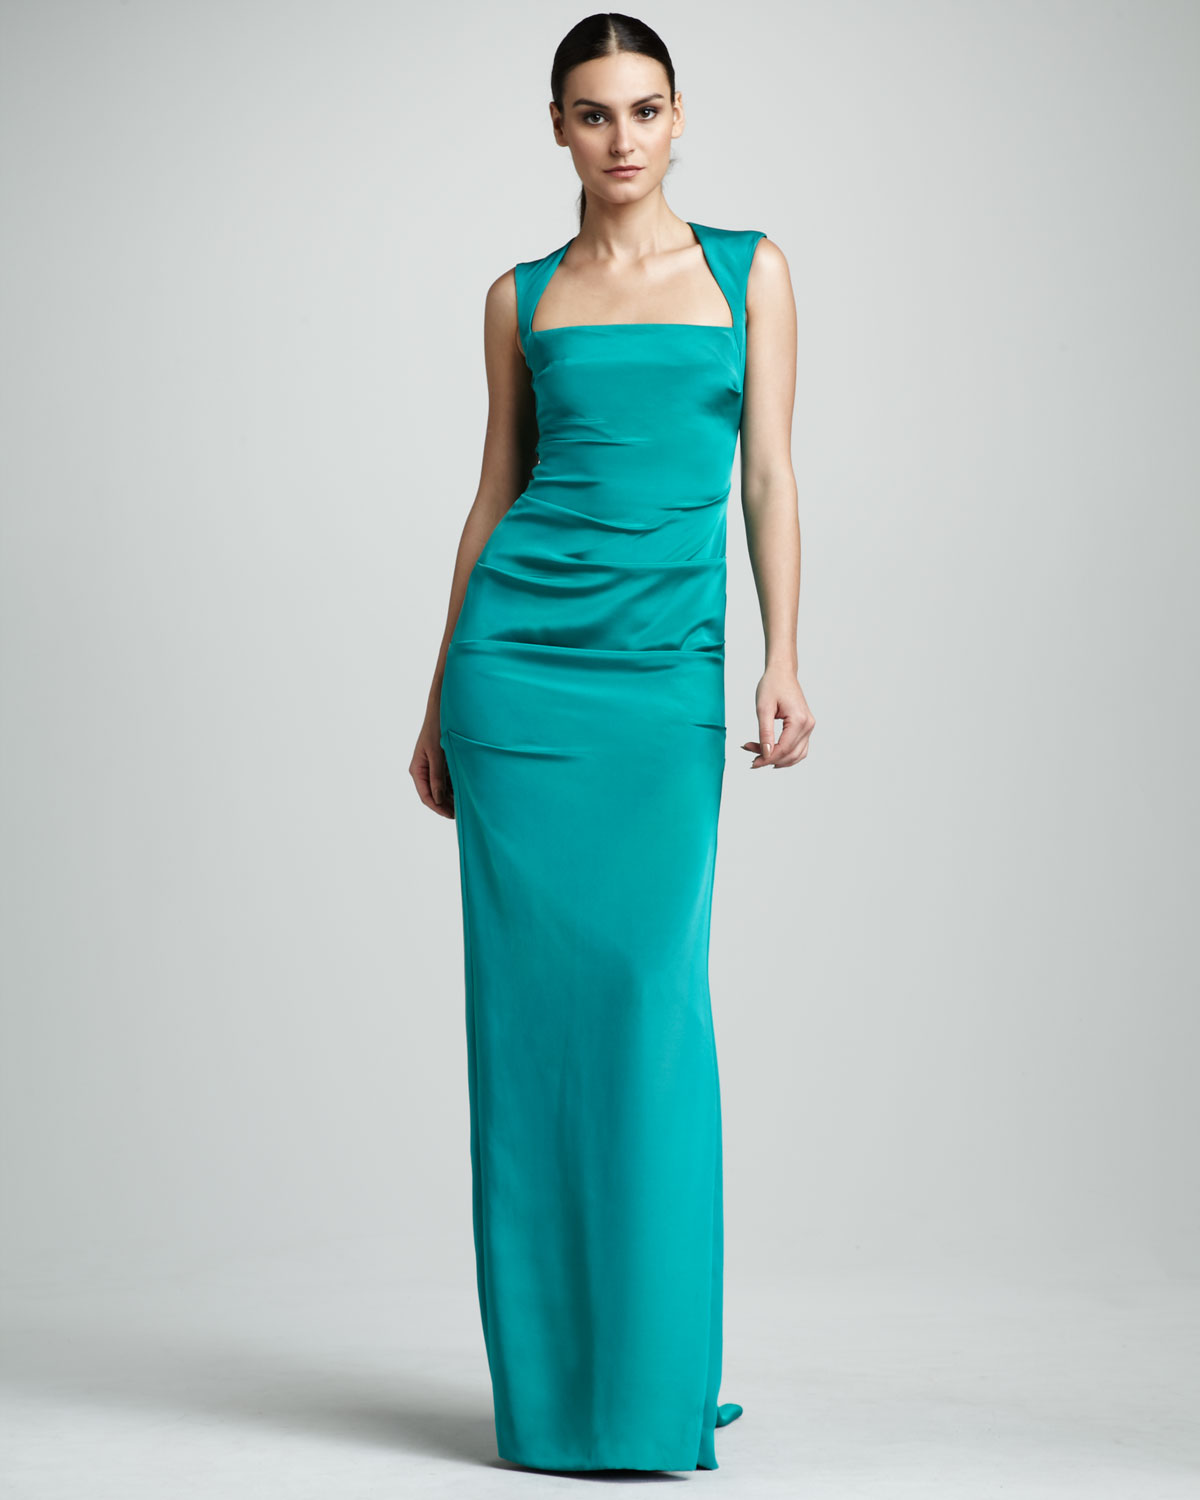 Lyst - Nicole Miller Square-neck Crepe De Chine Gown in Green